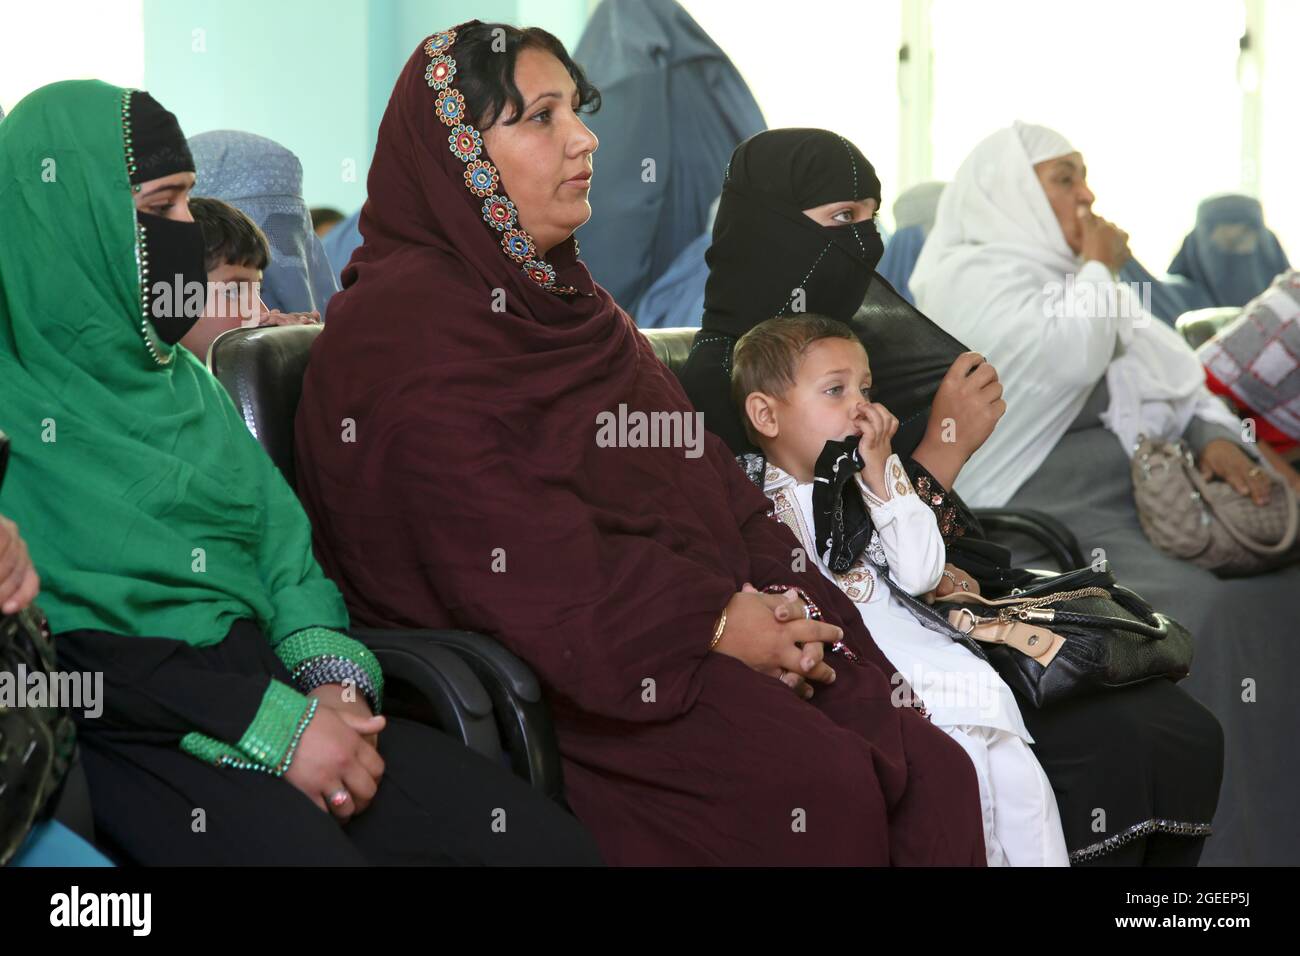 Local women listen to a speaker at an International Women's Day meeting at the Khost Provincial Headquarters in Khost city, Khost province, Afghanistan, March 9, 2013. The meeting was one of the largest gatherings of women to ever occur in Khost province. They discussed a woman's strength and responsibility in her household as well as higher education for all women and girls. (U.S. Army photo by Sgt. Kimberly Trumbull / Released) Stock Photo